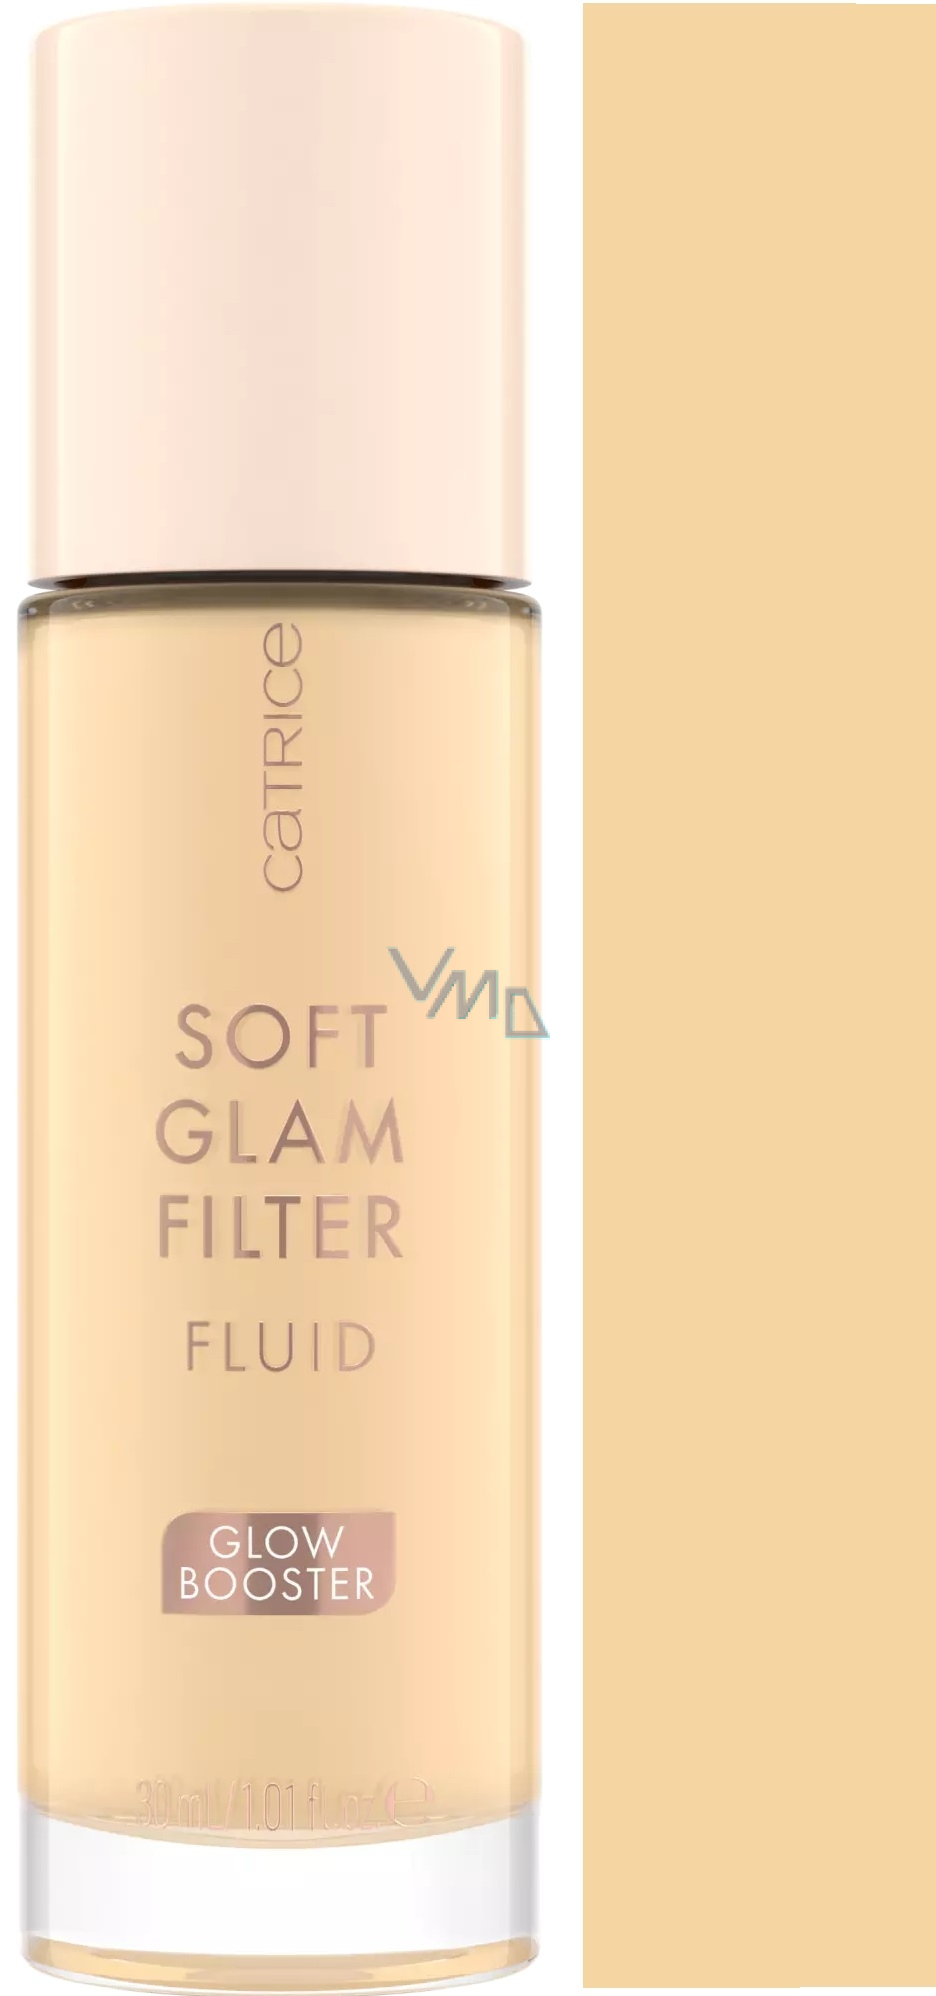 Catrice Soft Glam - 010 parfumerie drogerie VMD Fair ml foundation - Light - Filter with tinted soft coverage 30 Fluid